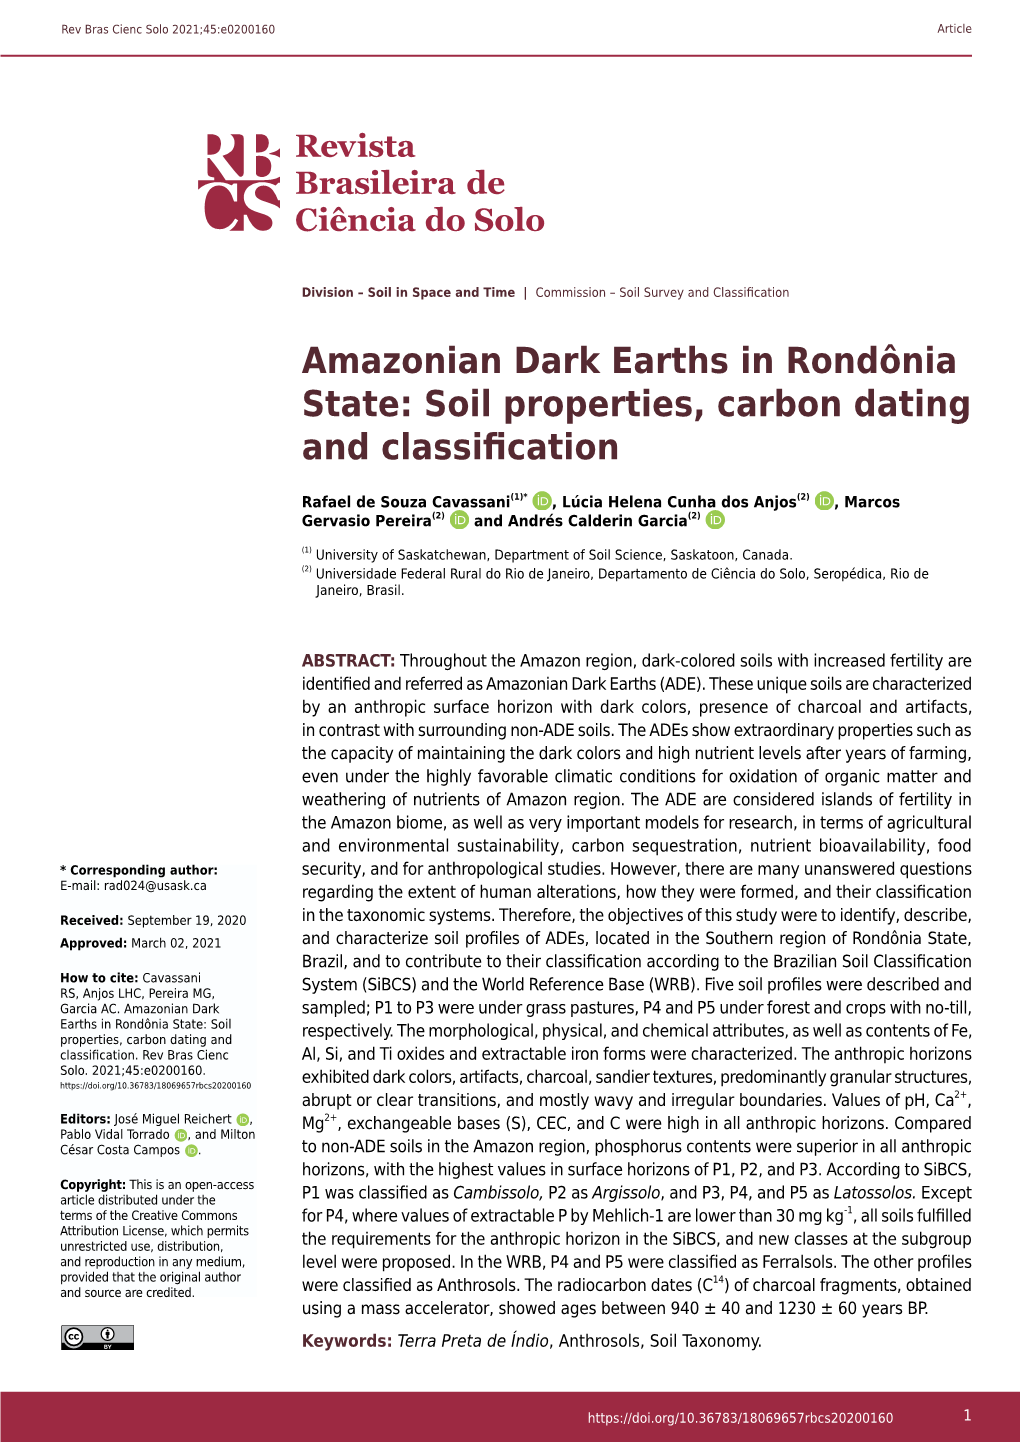 Soil Properties, Carbon Dating and Classification